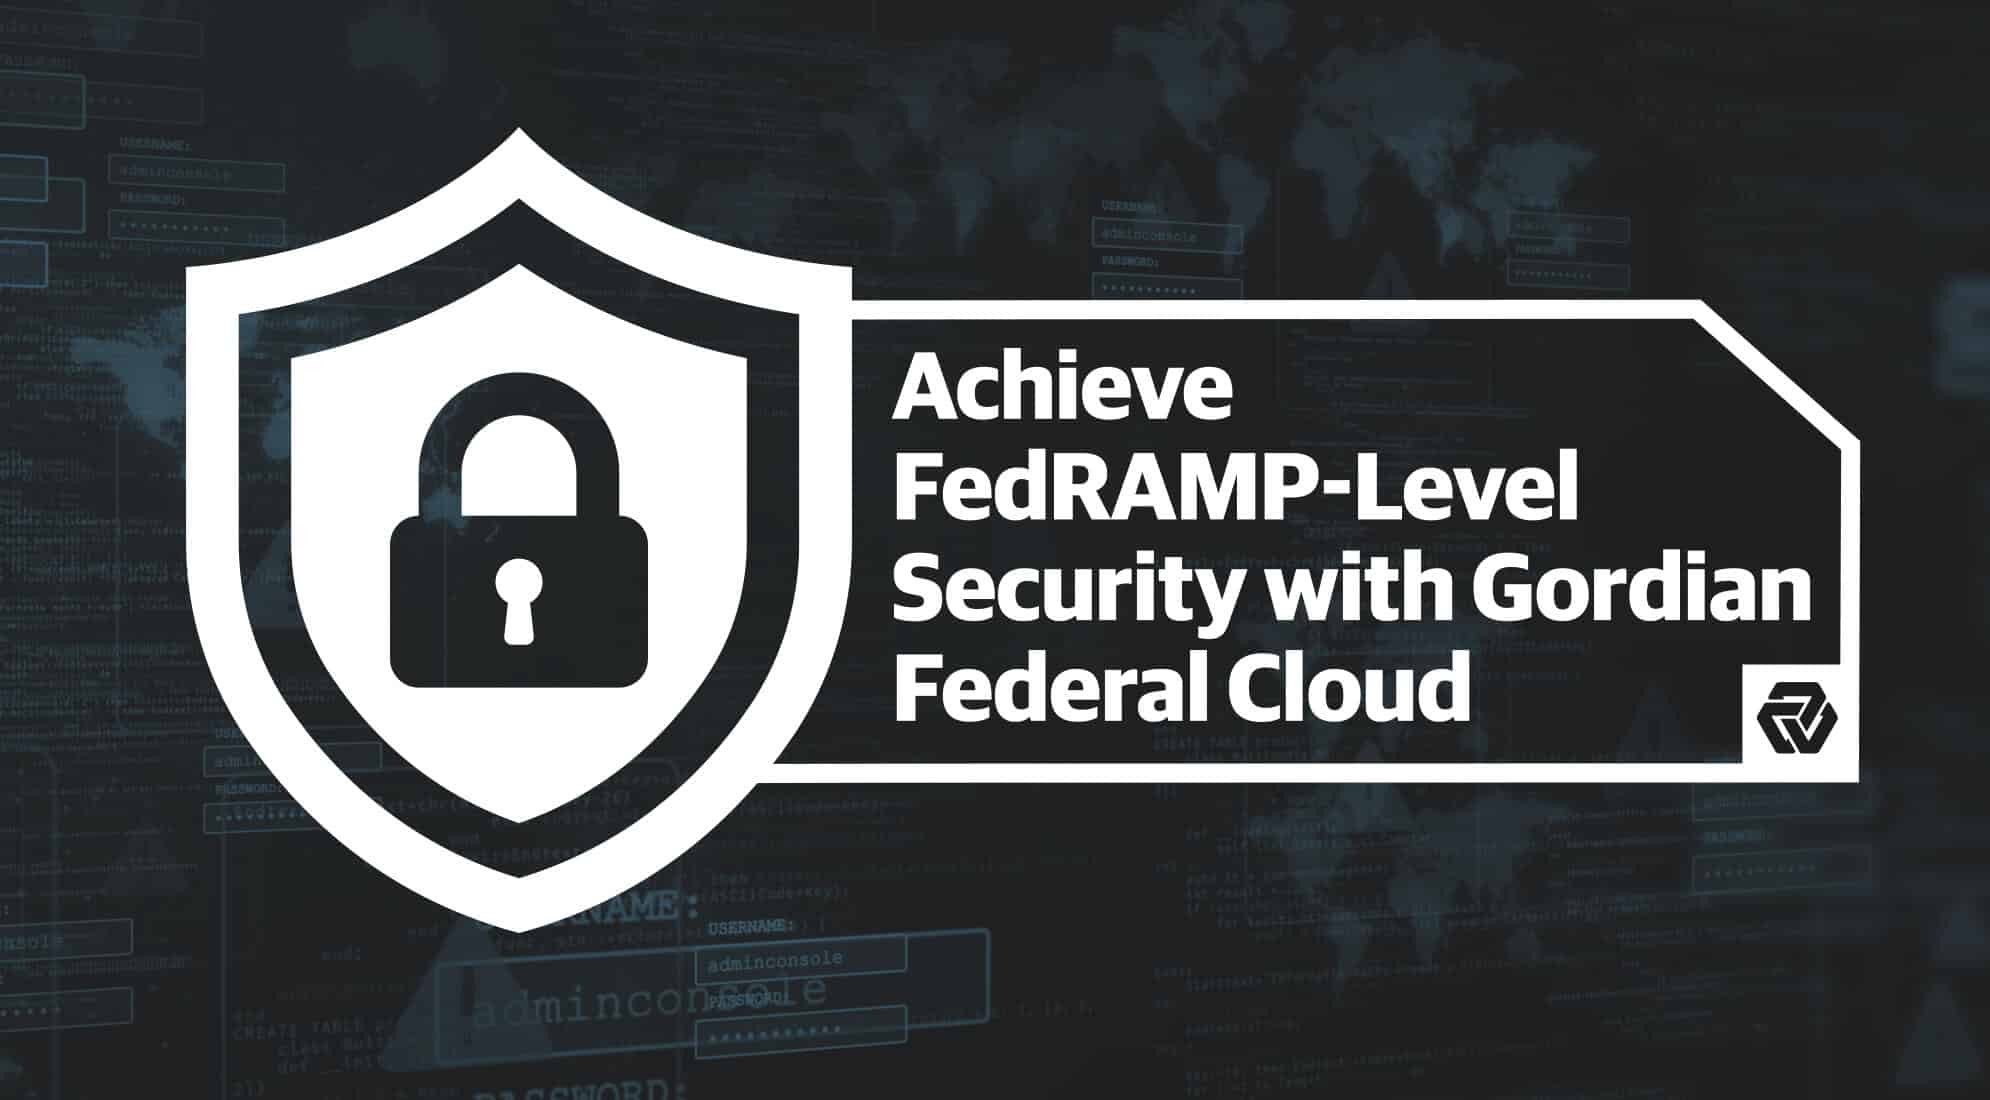 Achieve FedRAMP-Level Security with Gordian Federal Cloud 4